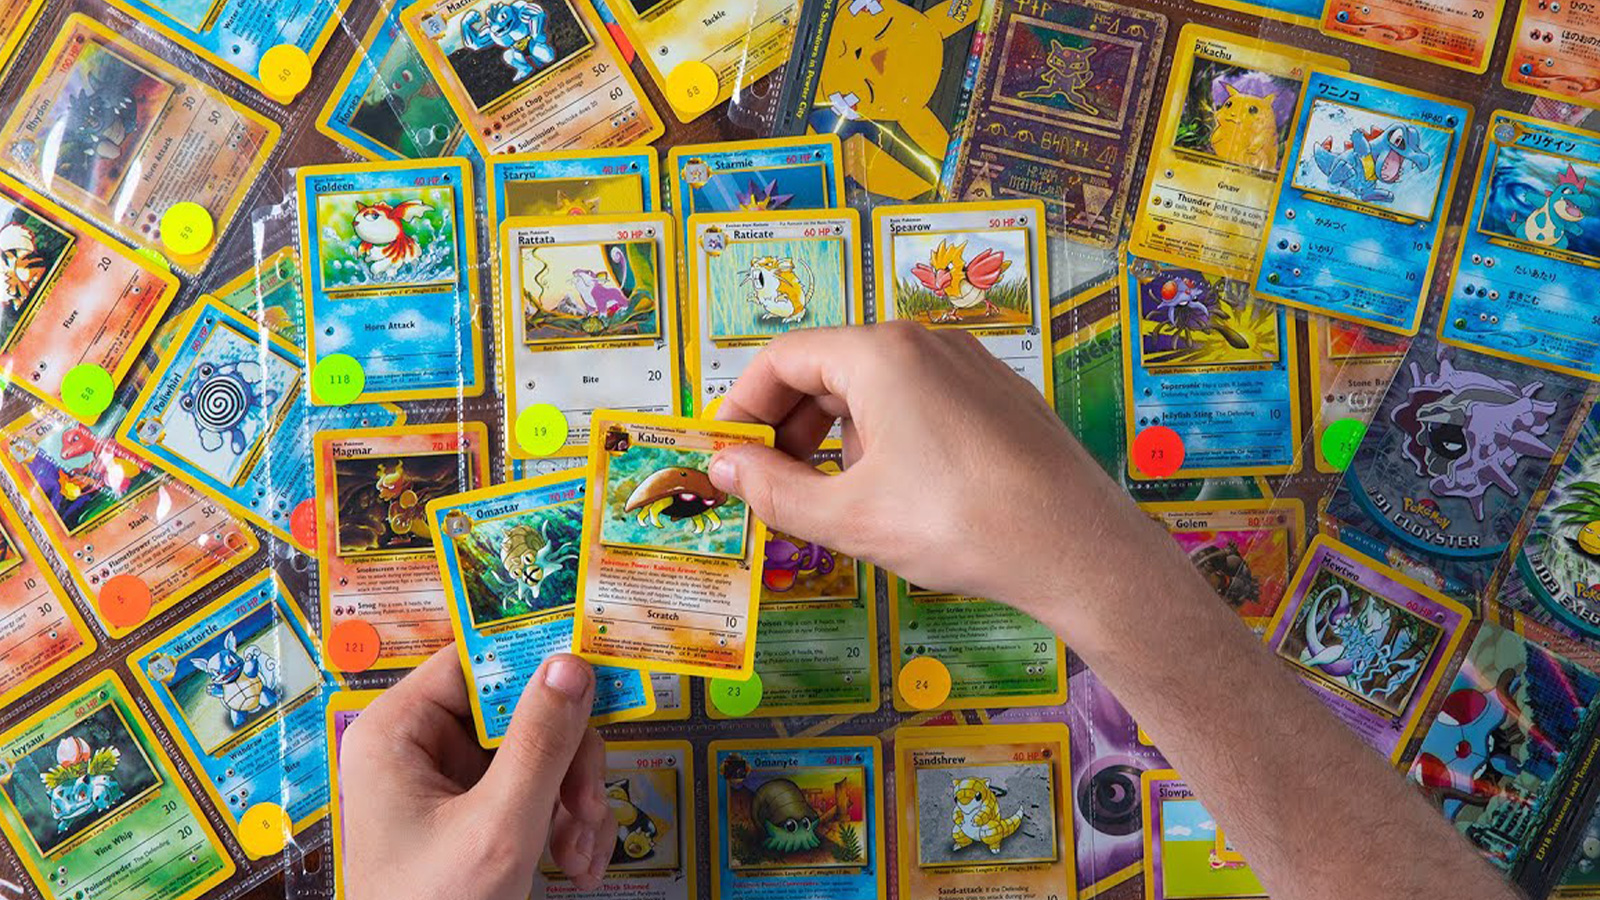 How to Make Your Own Pokémon Card Sleeves! 